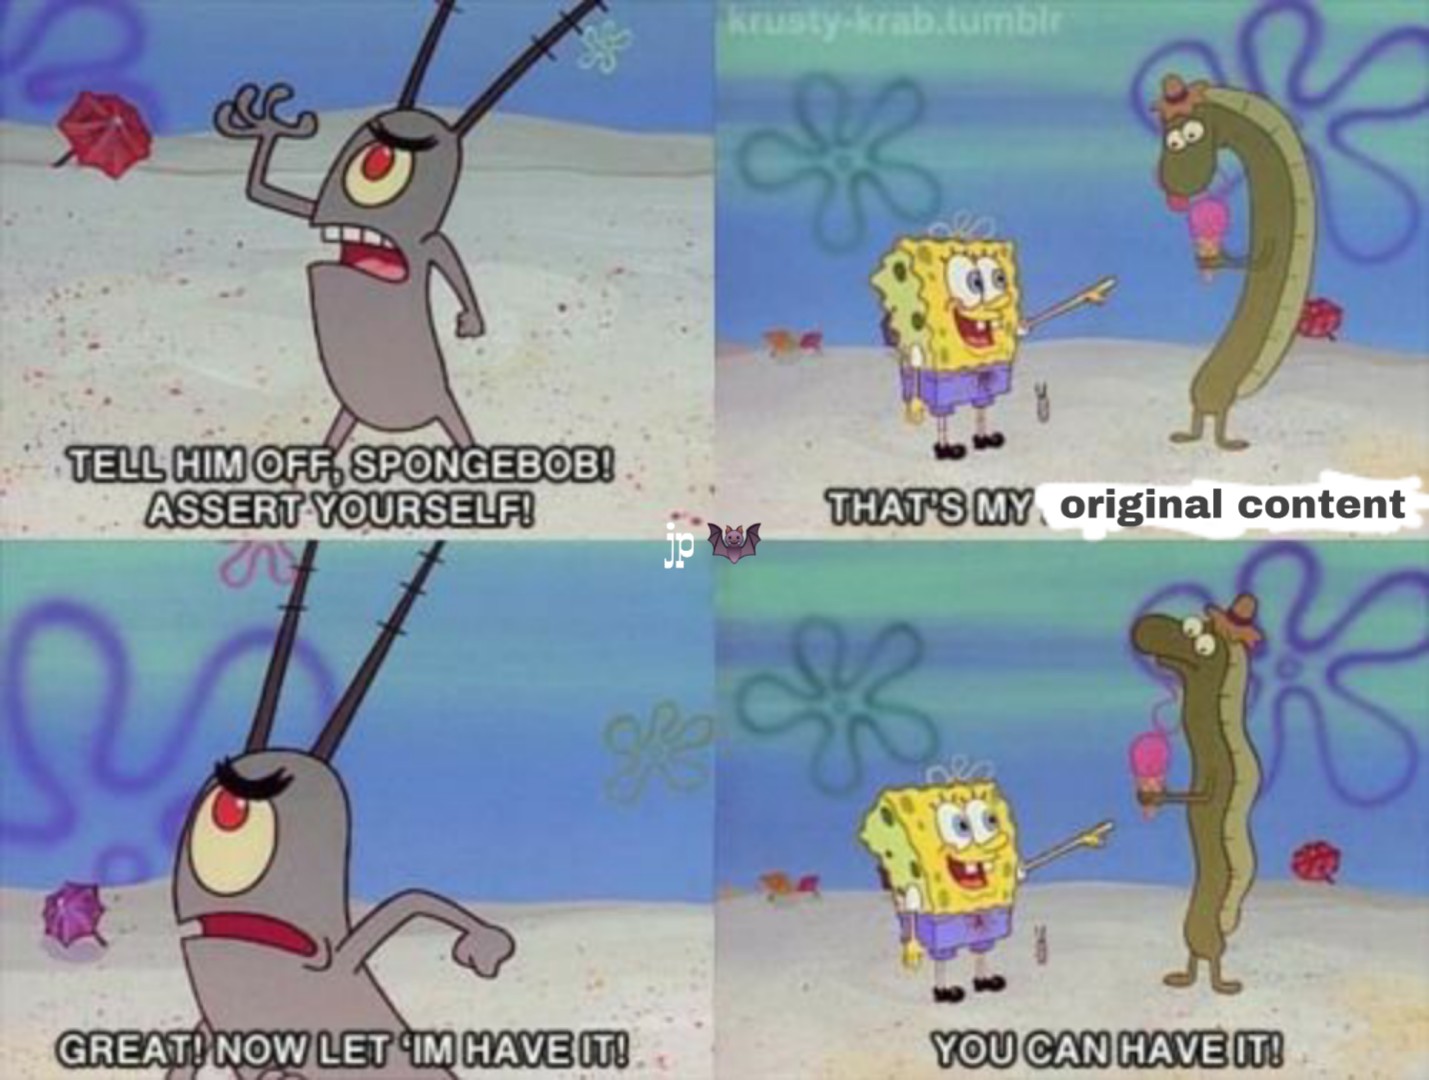 spongebob assertive - krustykrab tumblr Tell Him Off. Spongebob! Assert Yourself! That'S My original content Great! Now Let Im Have It! You Can Have It!